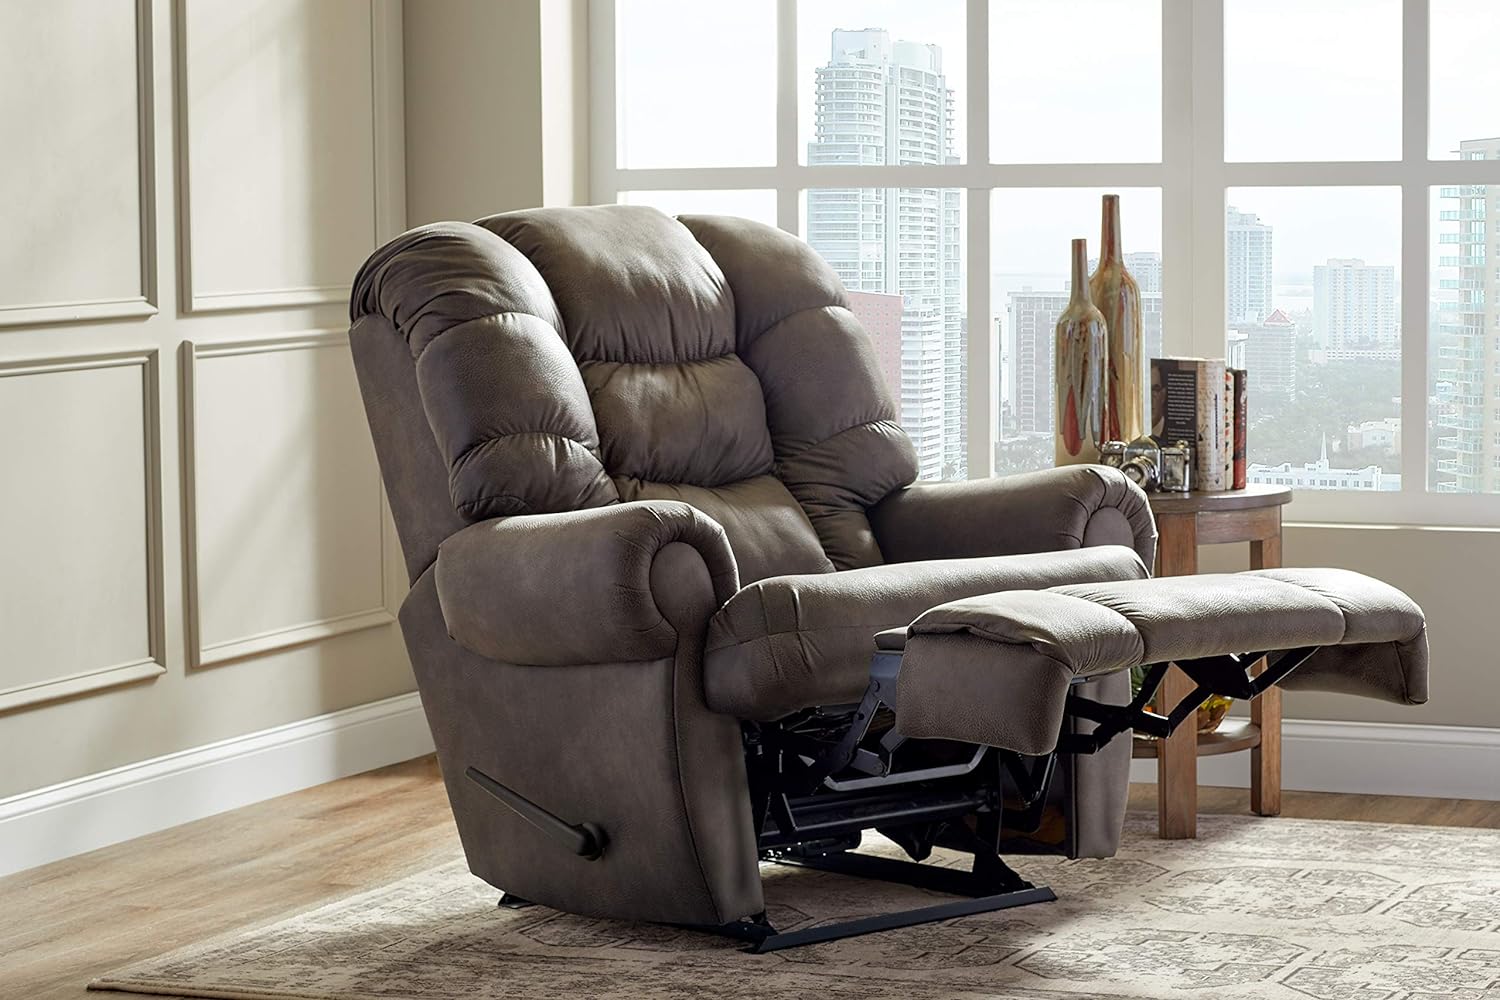 How Strict Are Weight Limits On Recliner Chairs | Storables